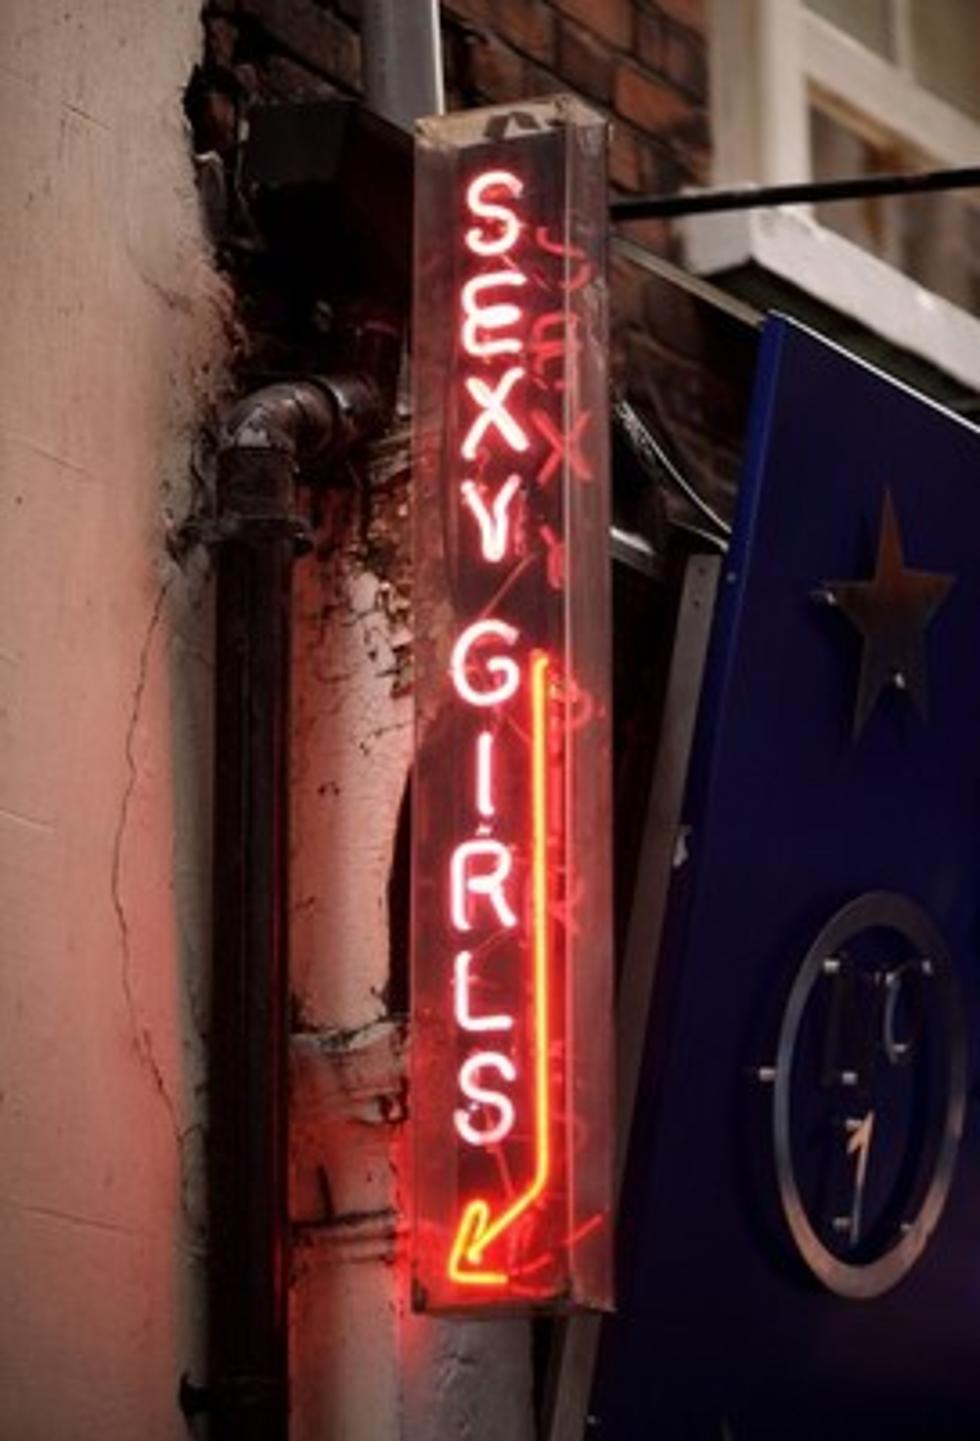 Houston Strip Clubs will Now Cost You $5 More